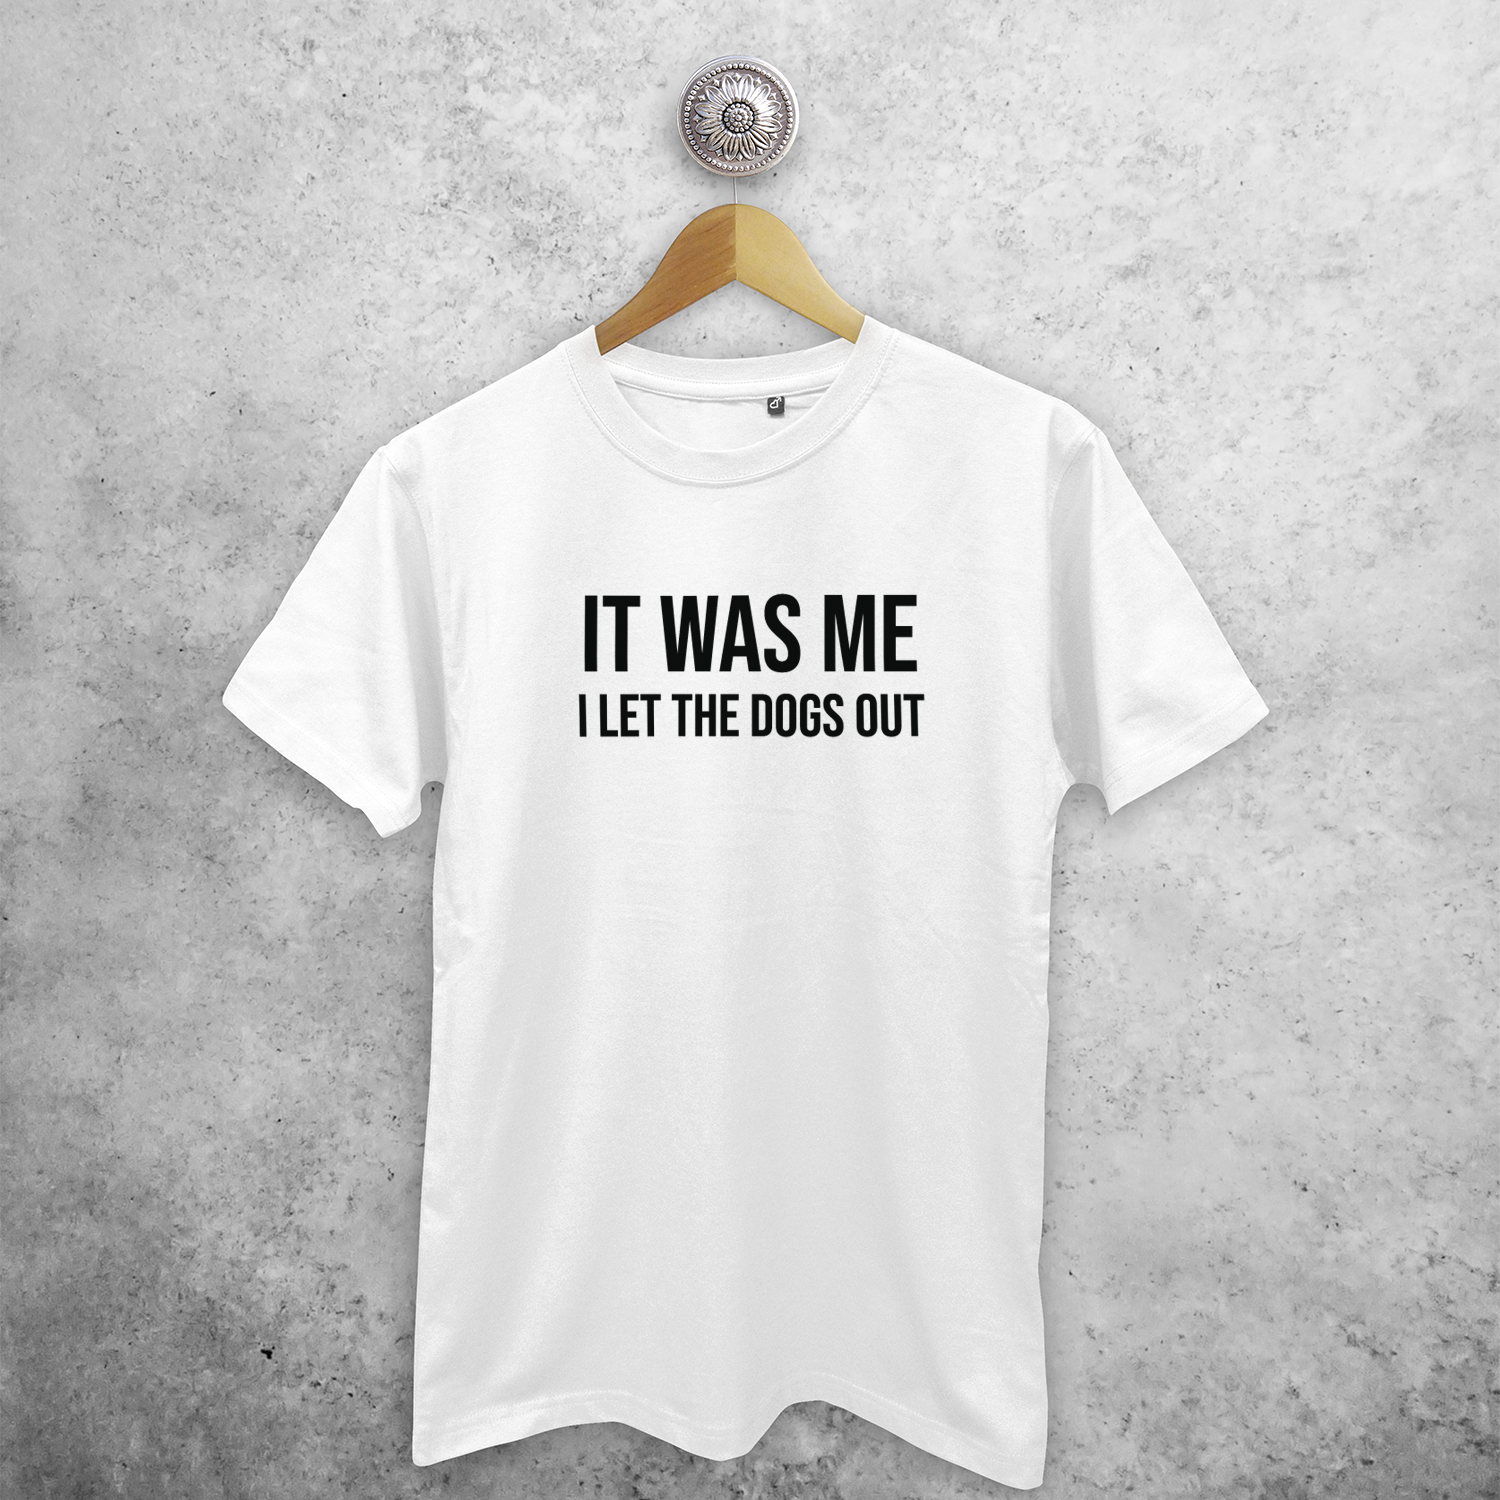 It was me - I let the dogs out' volwassene shirt